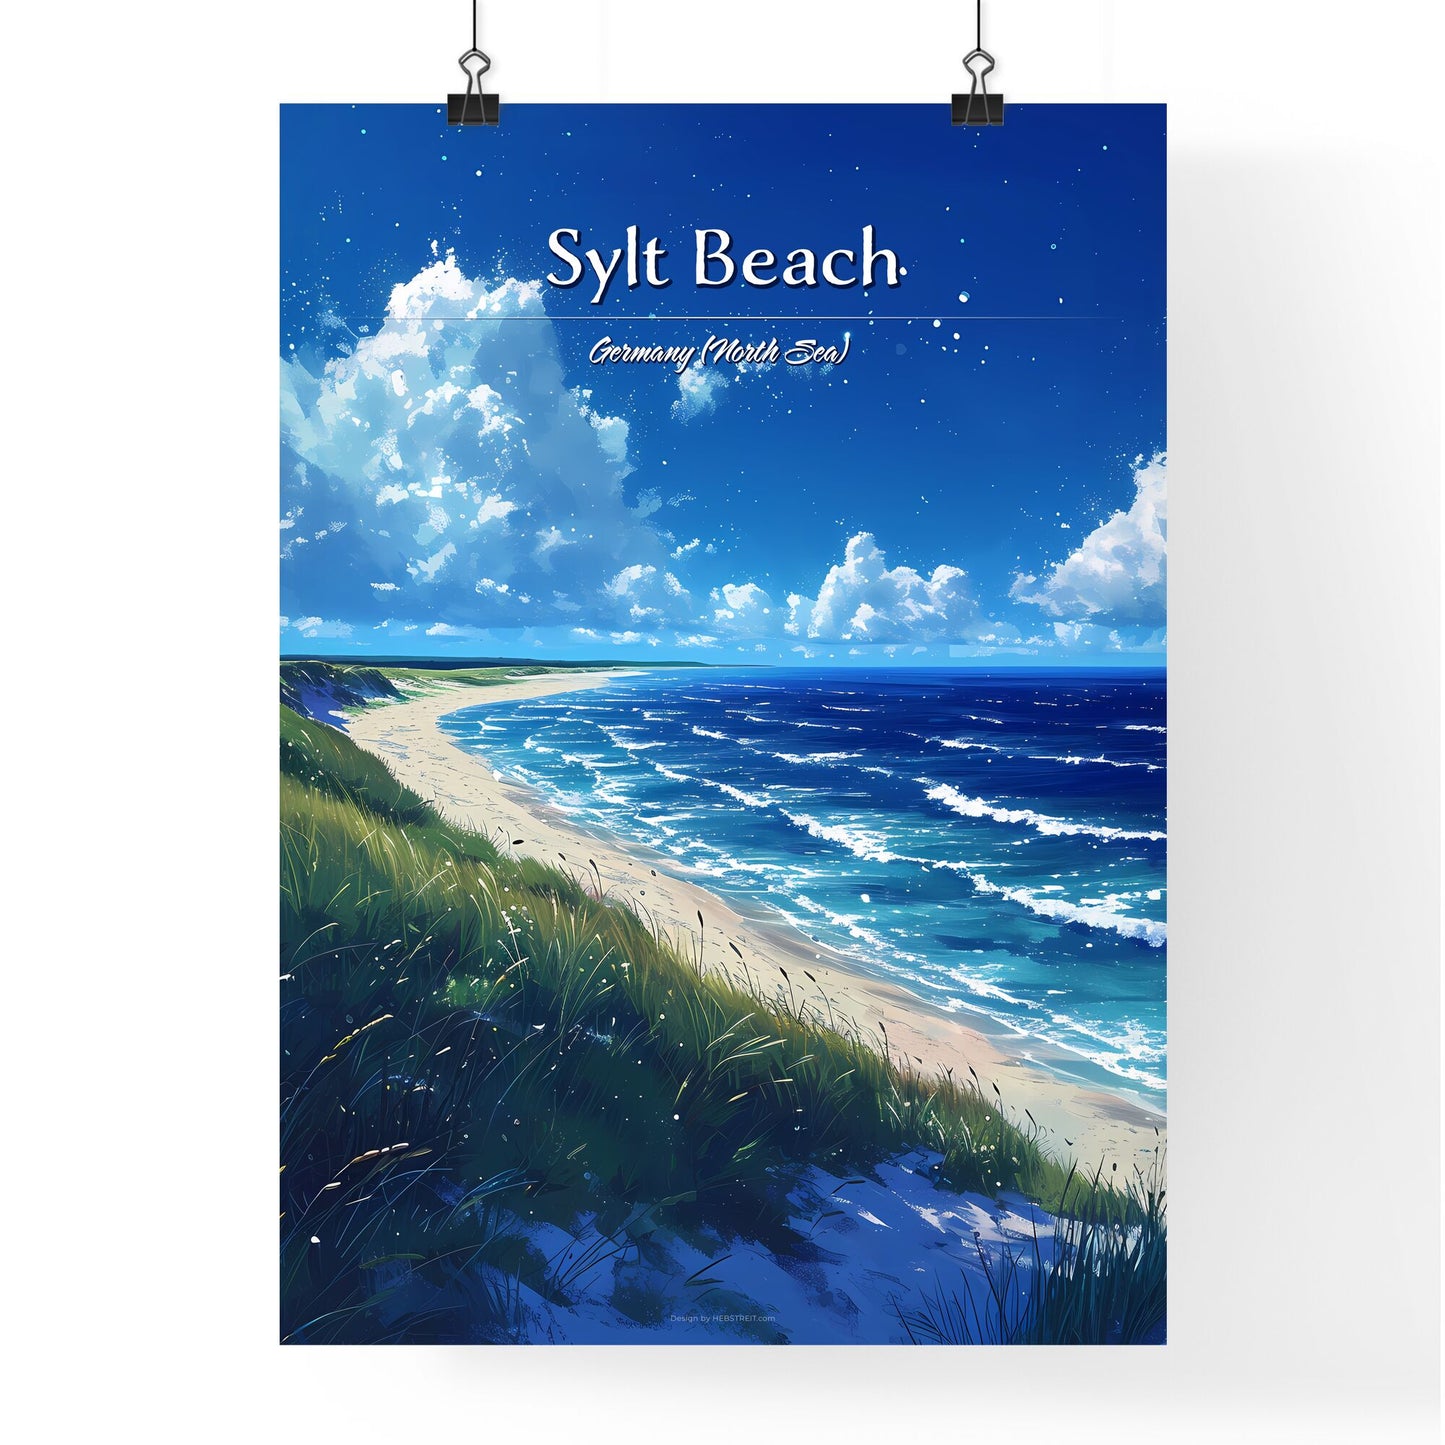 Sylt Beach, Germany (North Sea) - Art print of a beach with grass and water Default Title